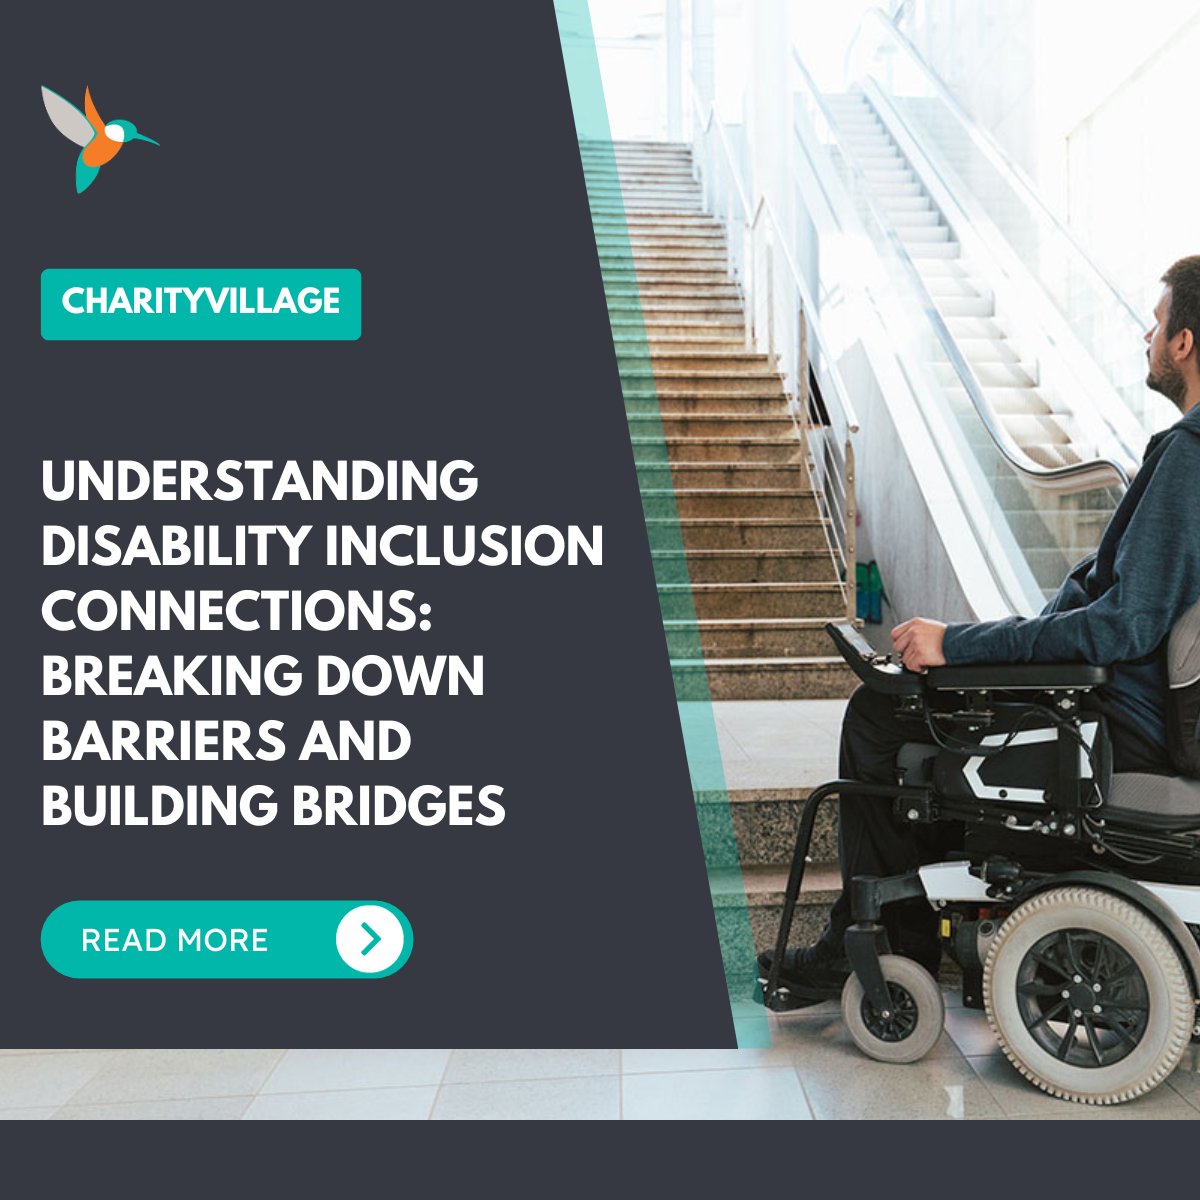 Disability #inclusion in business and employment is frequently being addressed in the #workplace. The disability factor is mainly rolled into over-arching talk about #IDEA, yet, too often, #disability is left out of the discussion. okt.to/jsYK0D